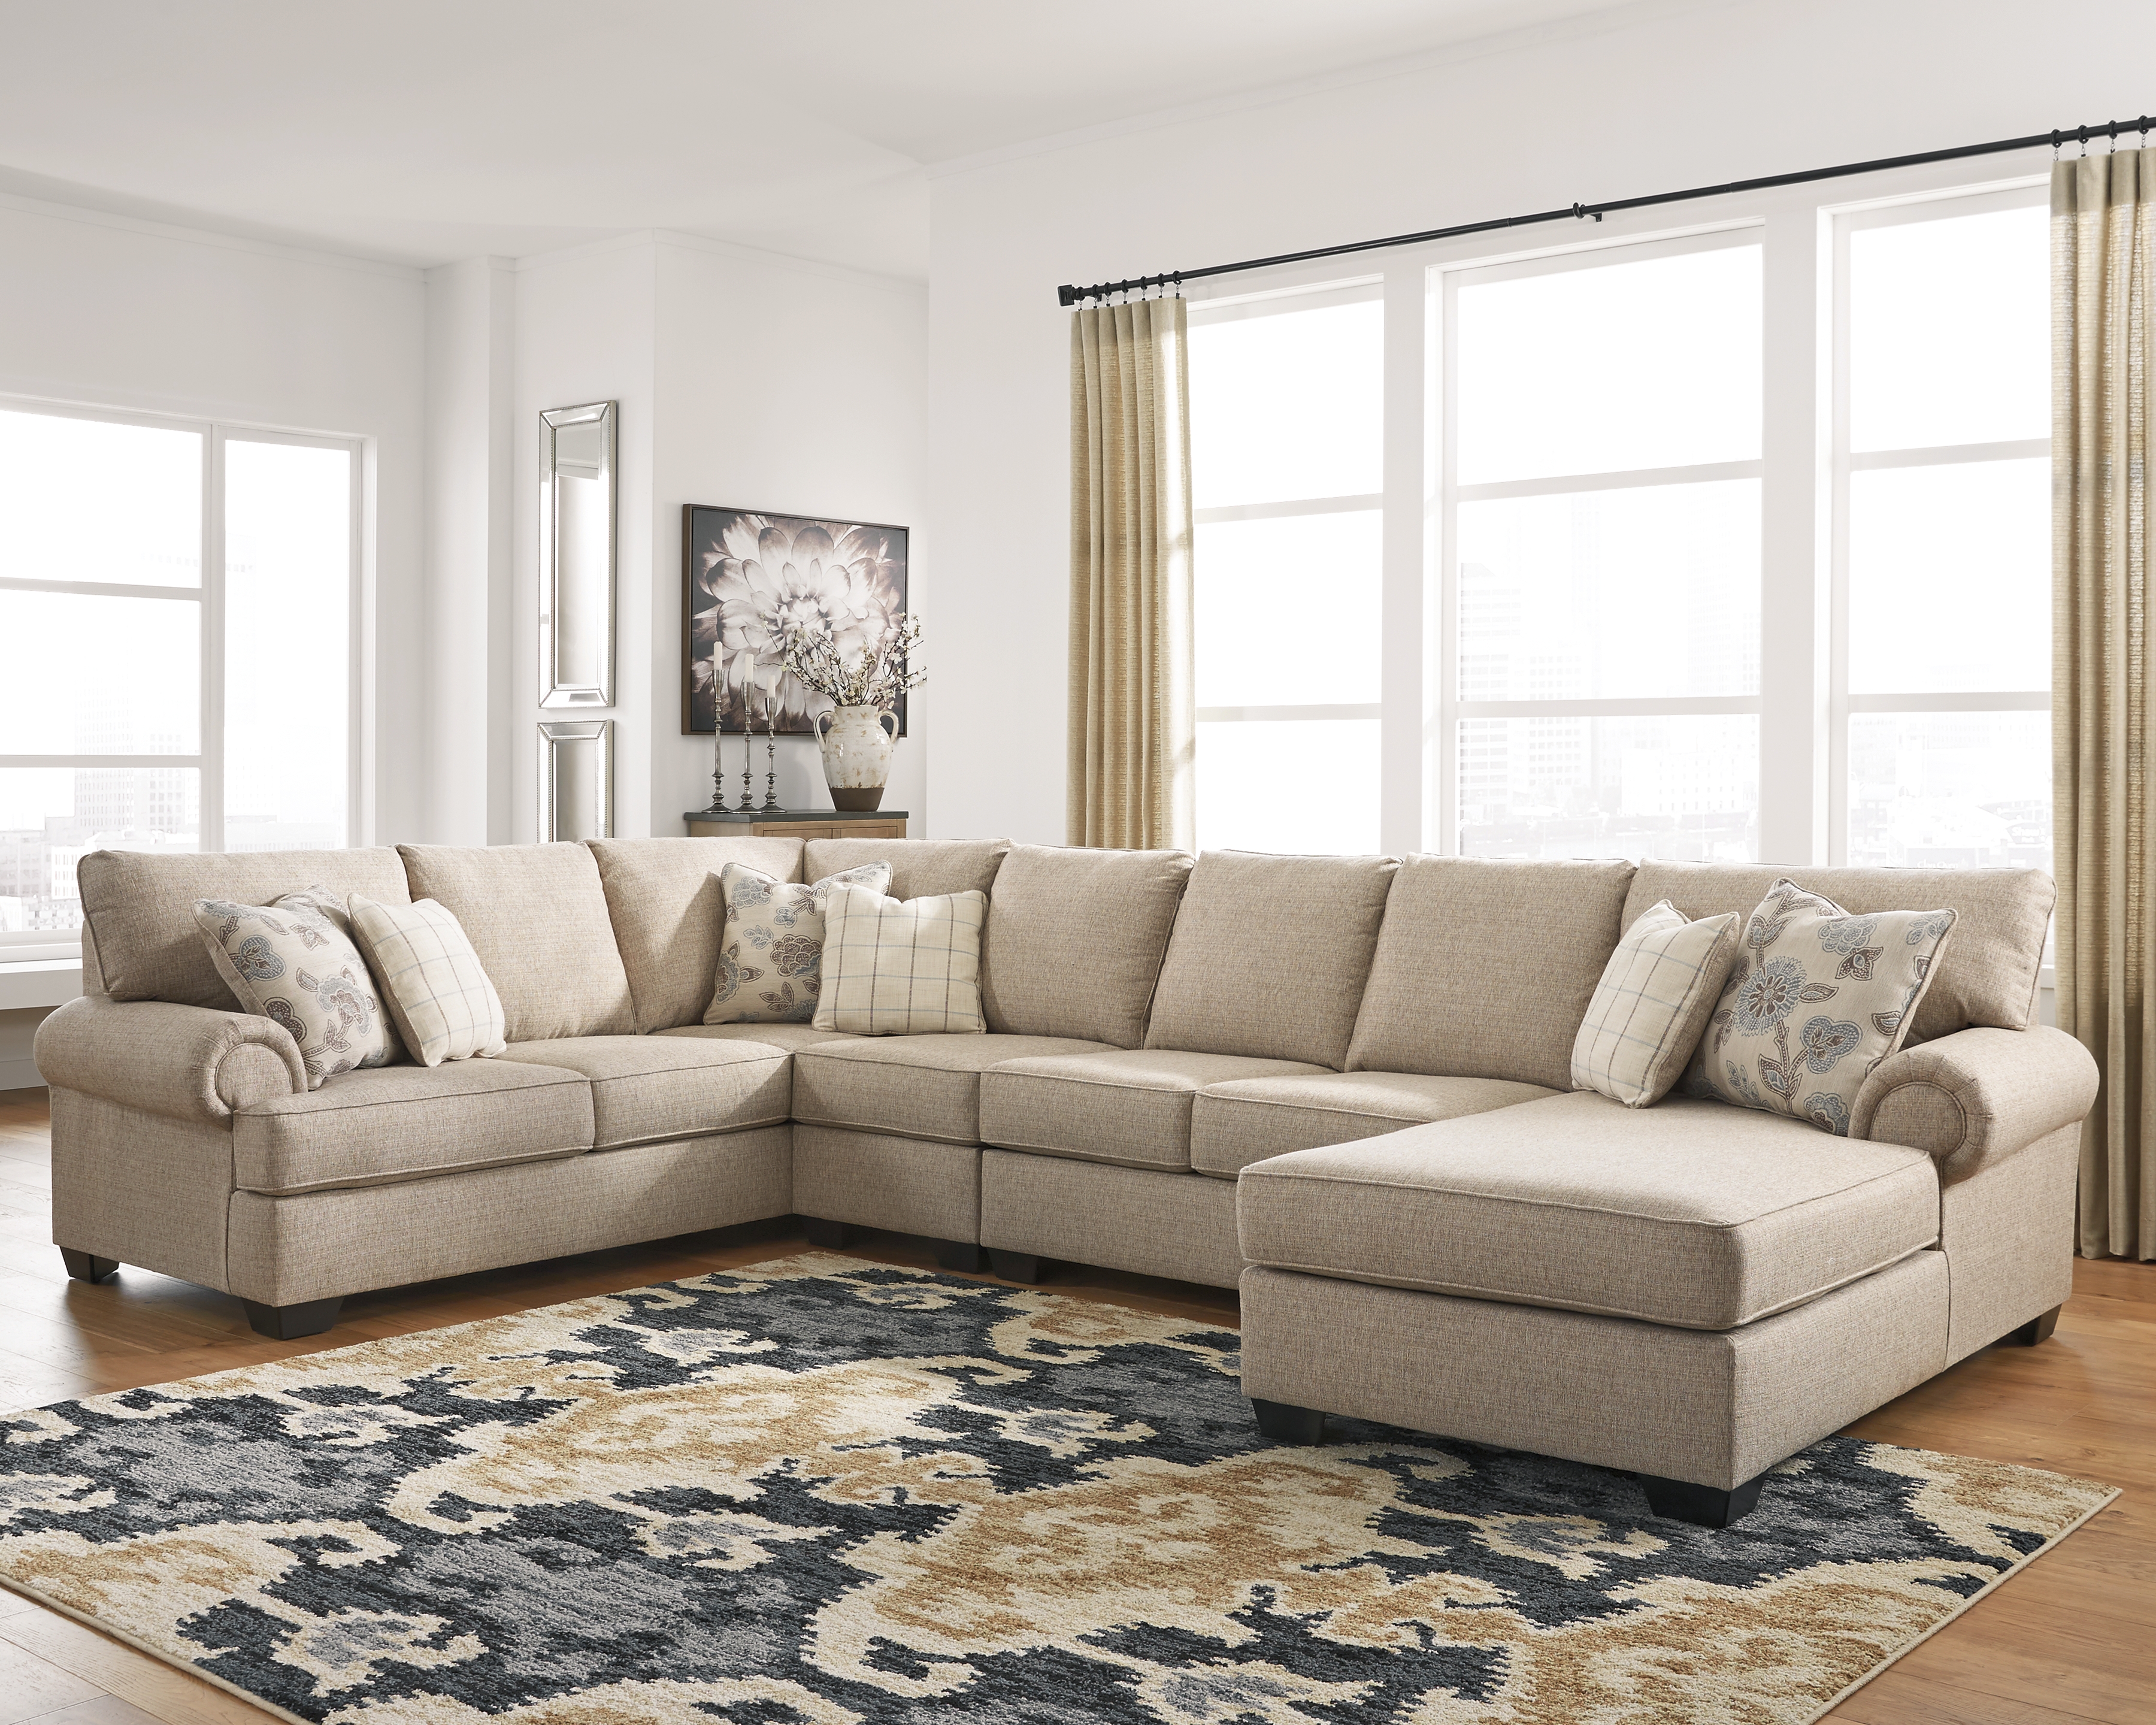 Baceno 4 Piece Sectional With Chaise